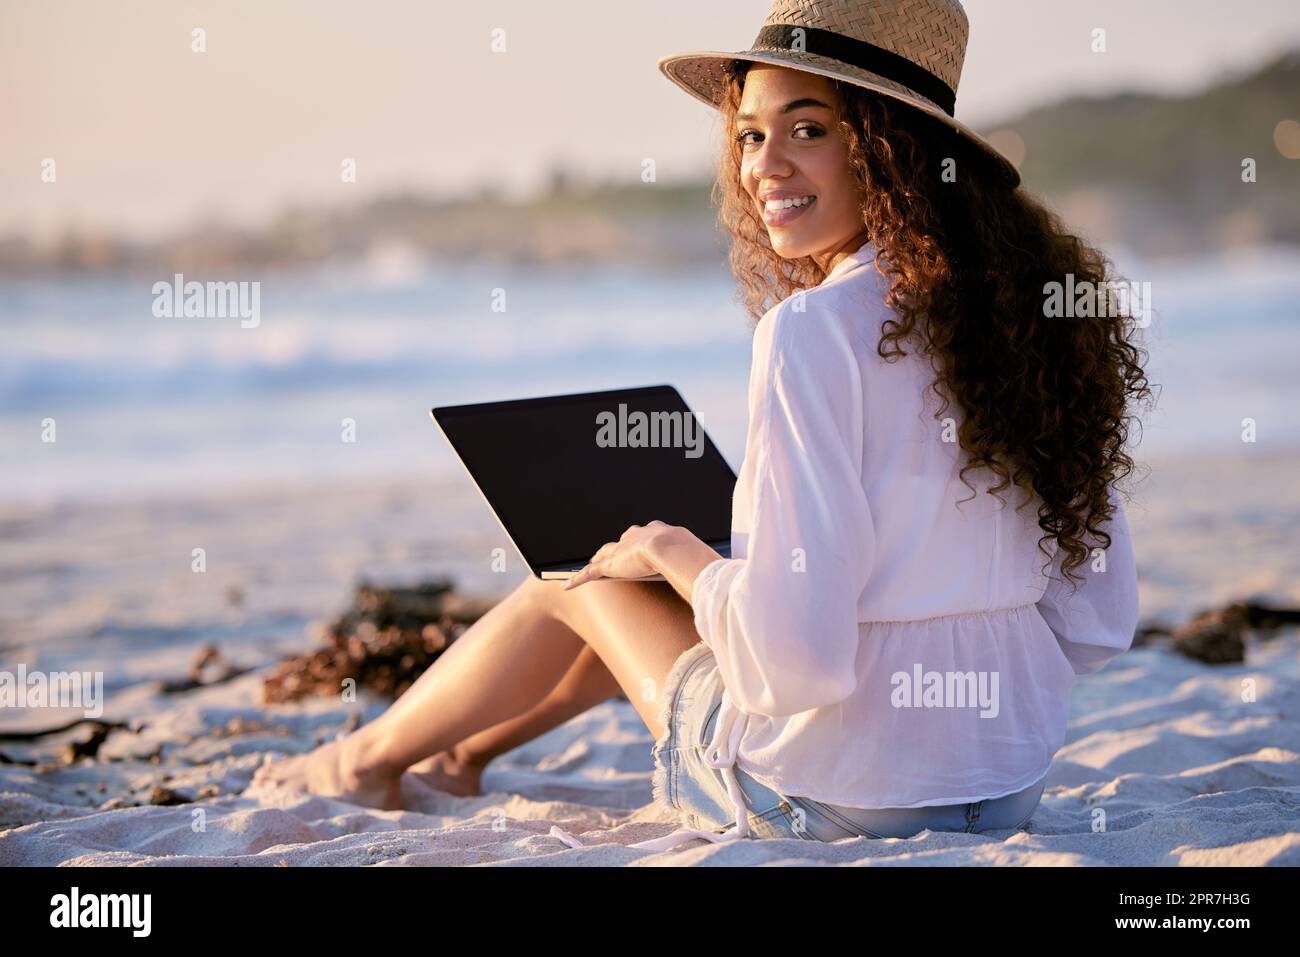 This place is perfect for anything. Portrait of a young beautiful woman using a laptop while sitting at the beach. Stock Photo